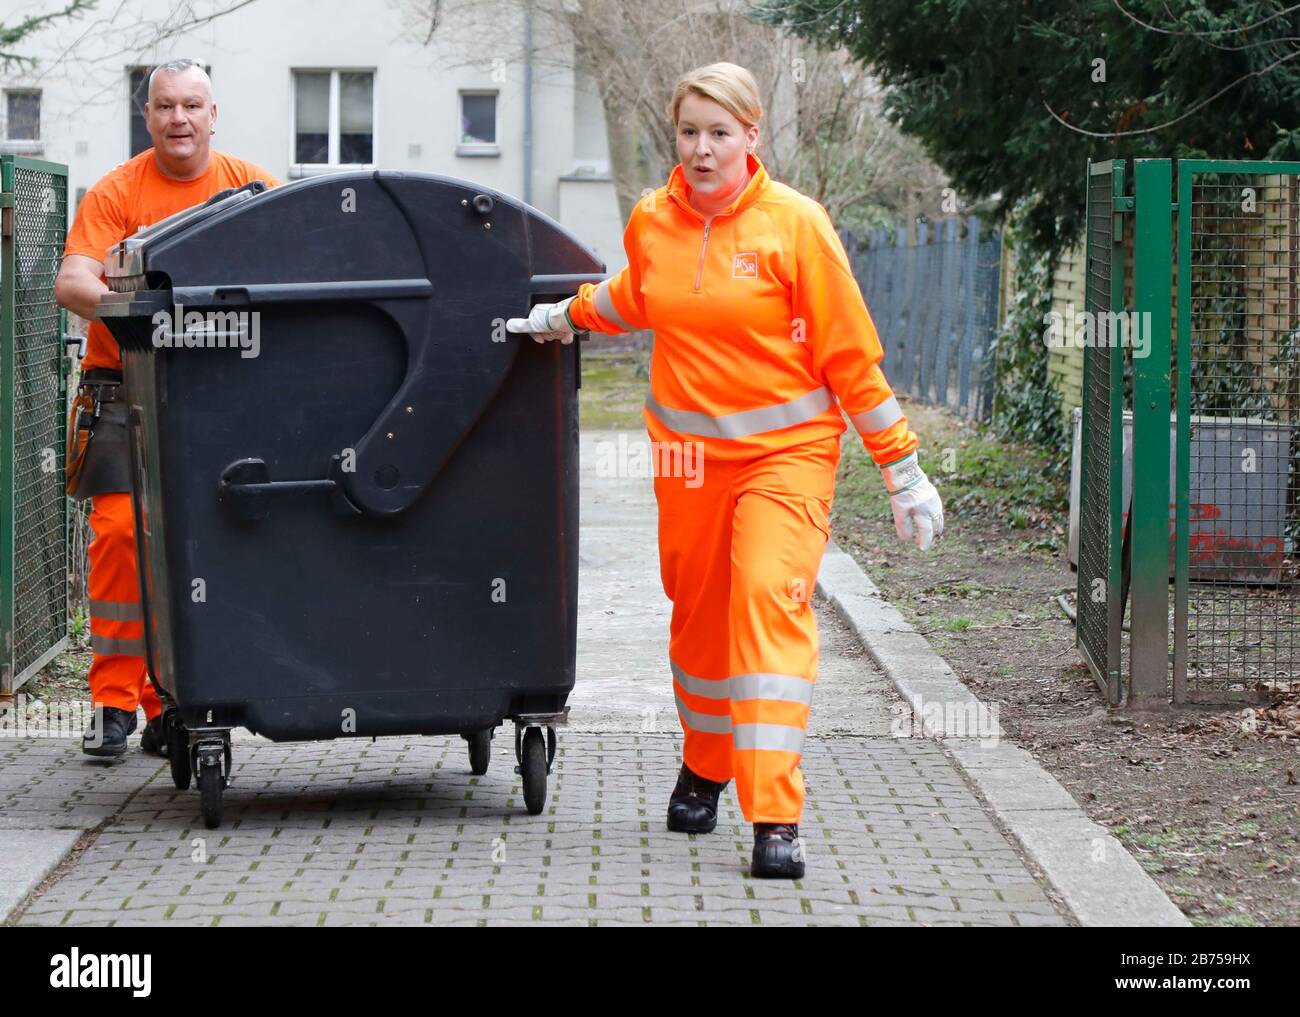 Federal Minister for Family Affairs Franziska Giffey as garbage collector at the waste disposal tour of the BSR, Berlin's city cleaning service, on 07.03.2019. Giffey informed herself about women in previously male-dominated professions in the municipal economy. [automated translation] Stock Photo